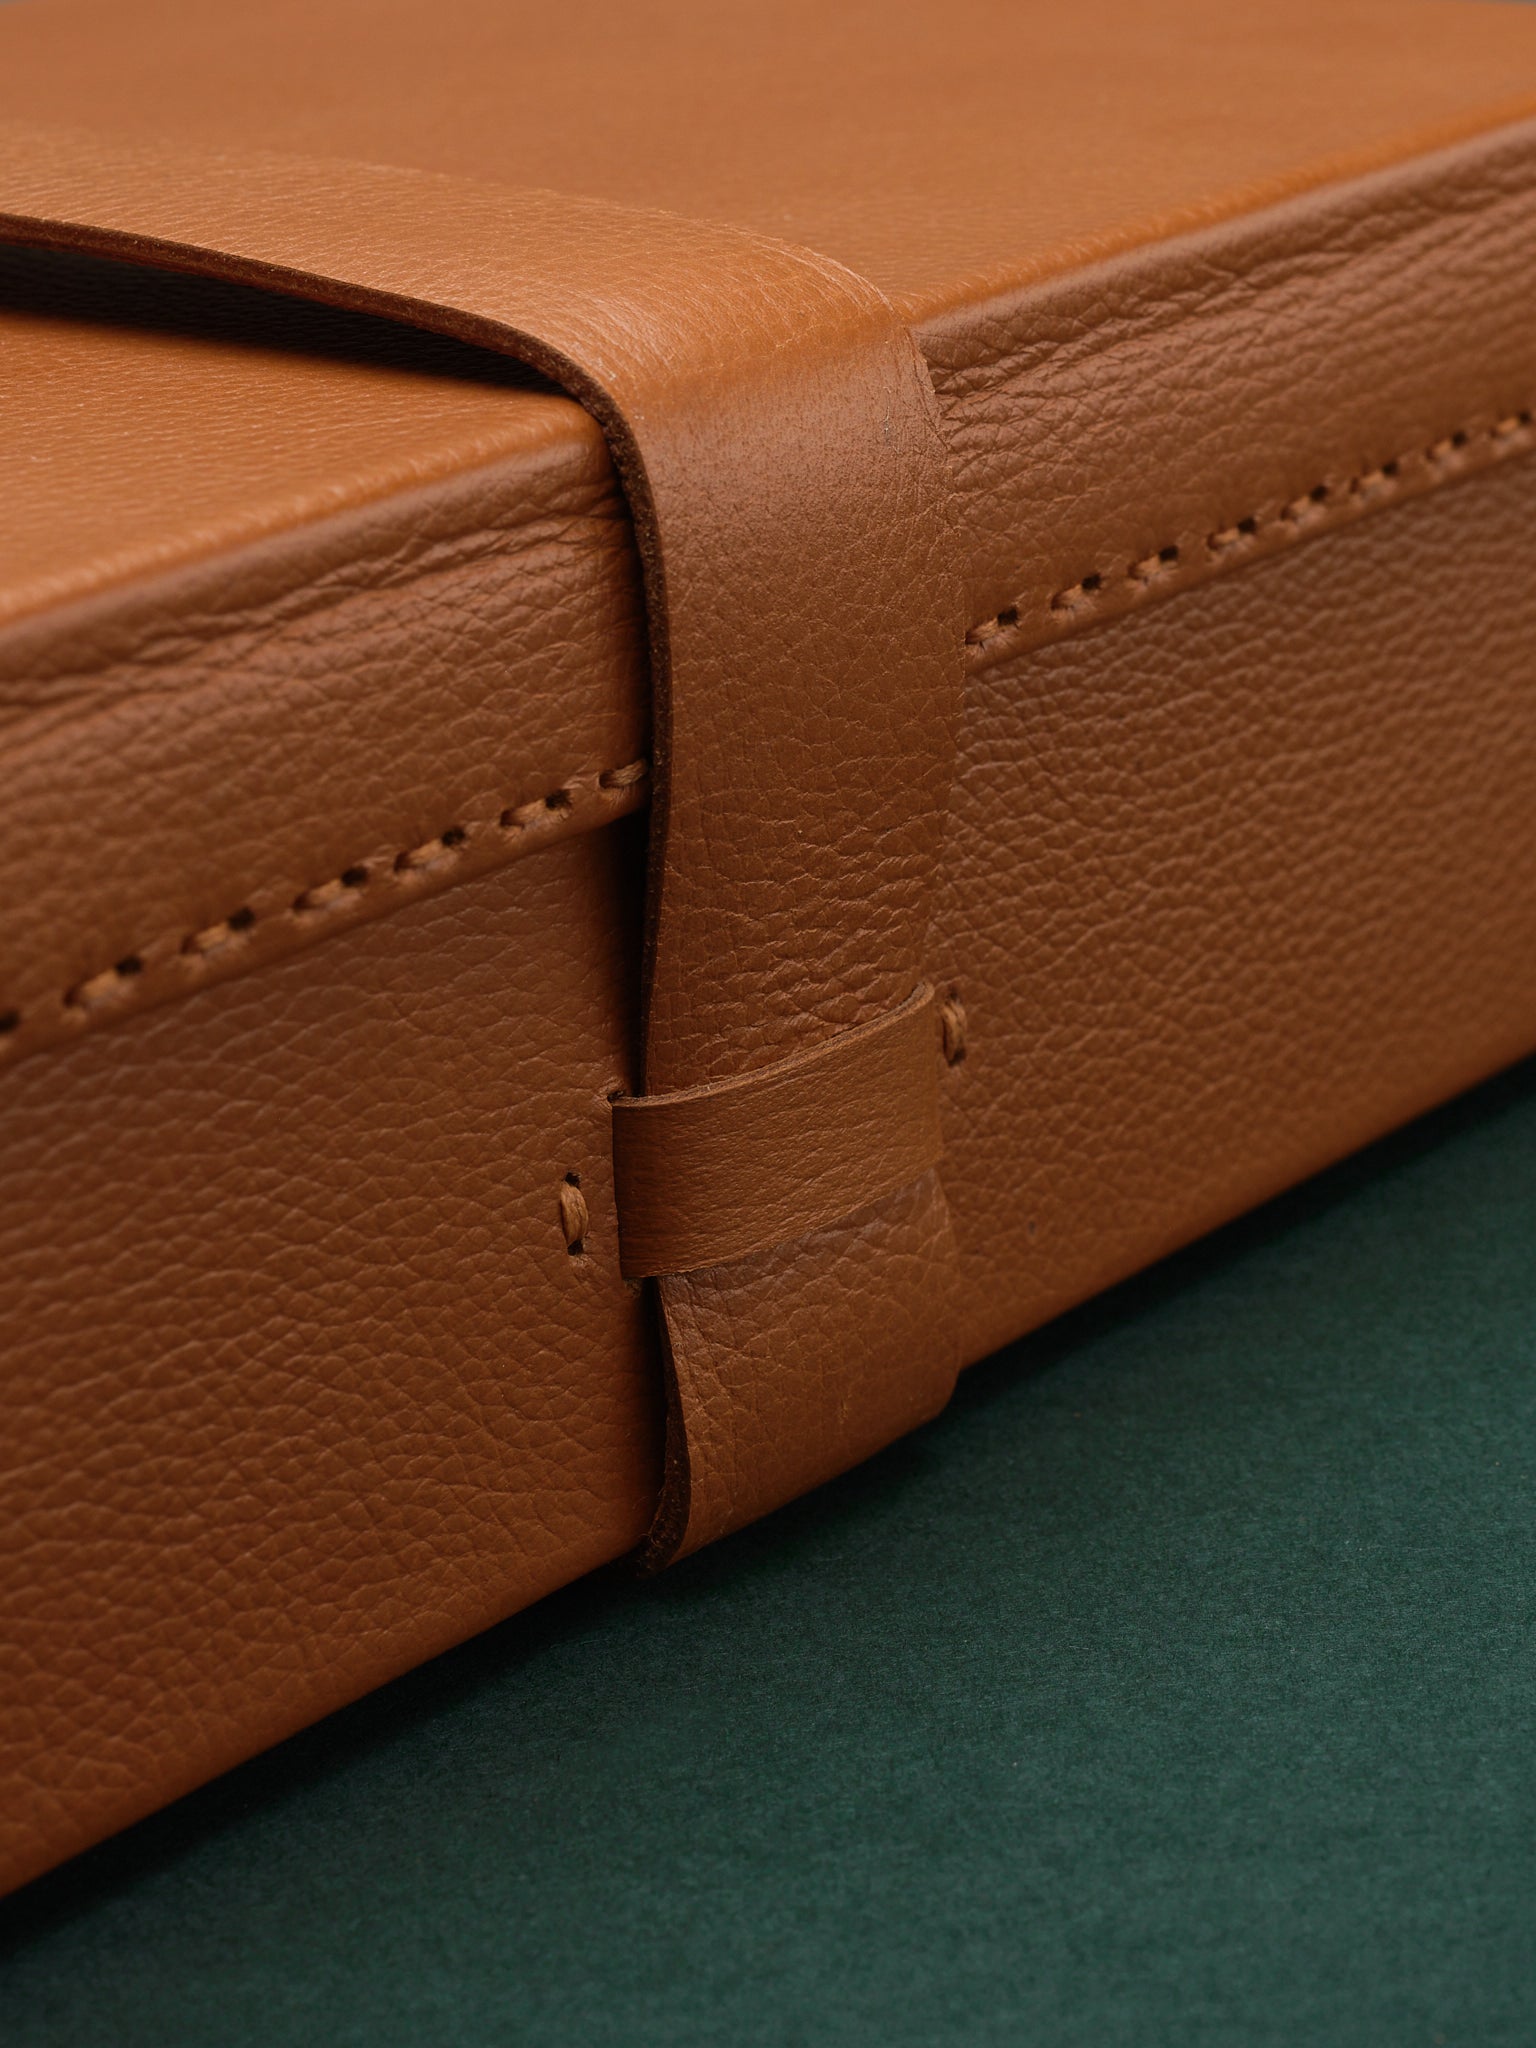 Hand-stitched Details. Luxury Watch Box Tan by Capra Leather